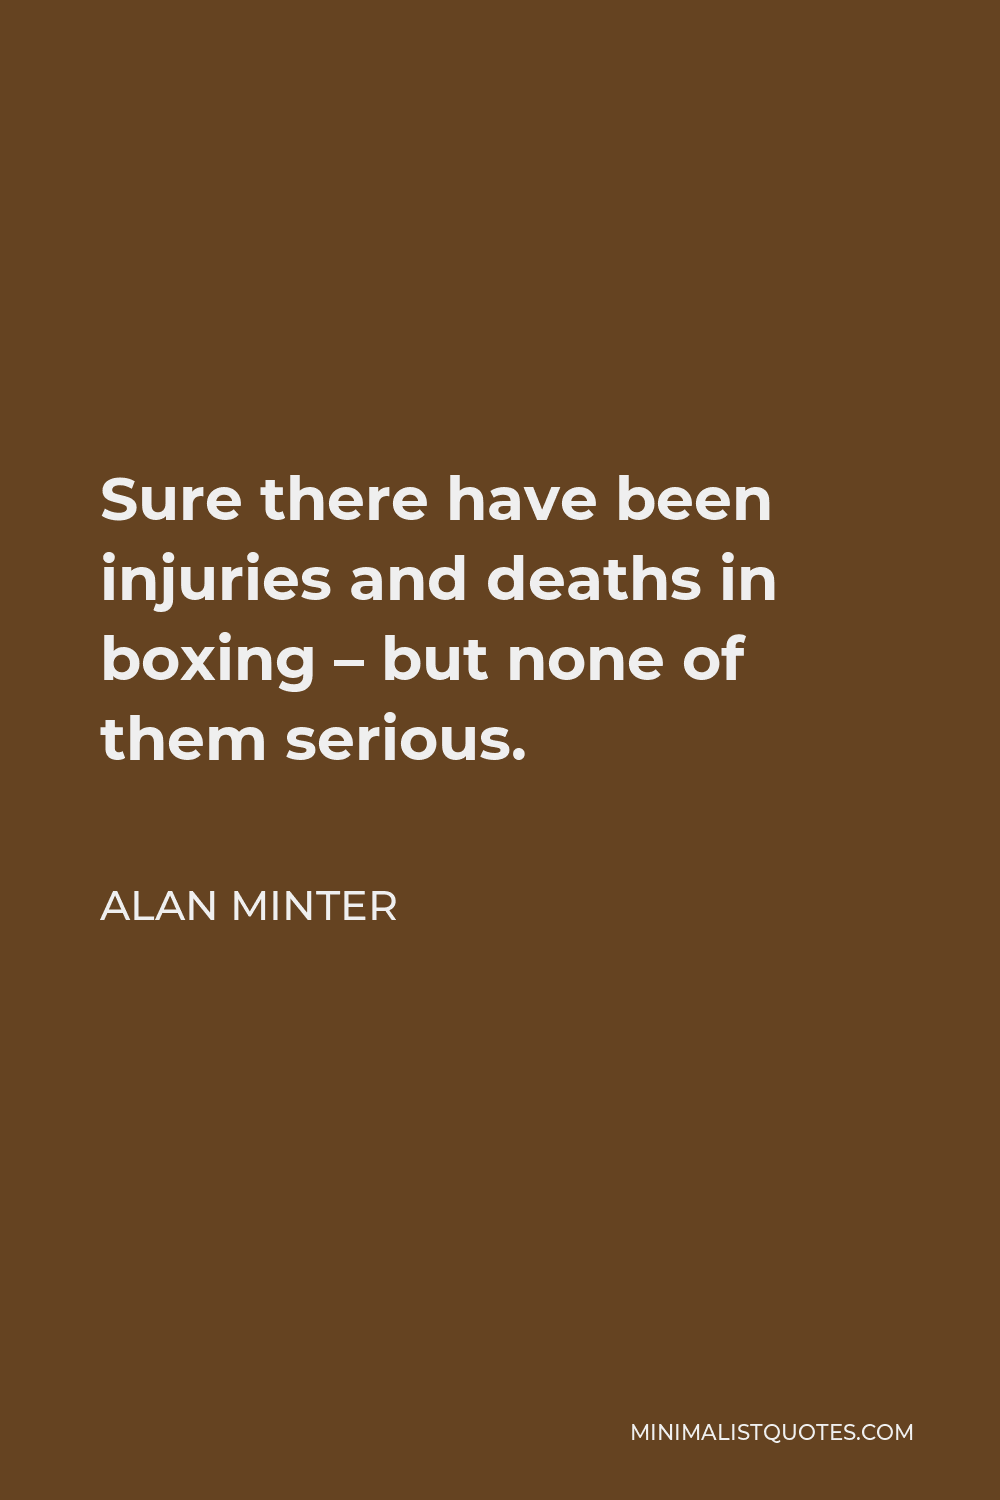 Alan Minter Quote - Sure there have been injuries and deaths in boxing – but none of them serious.